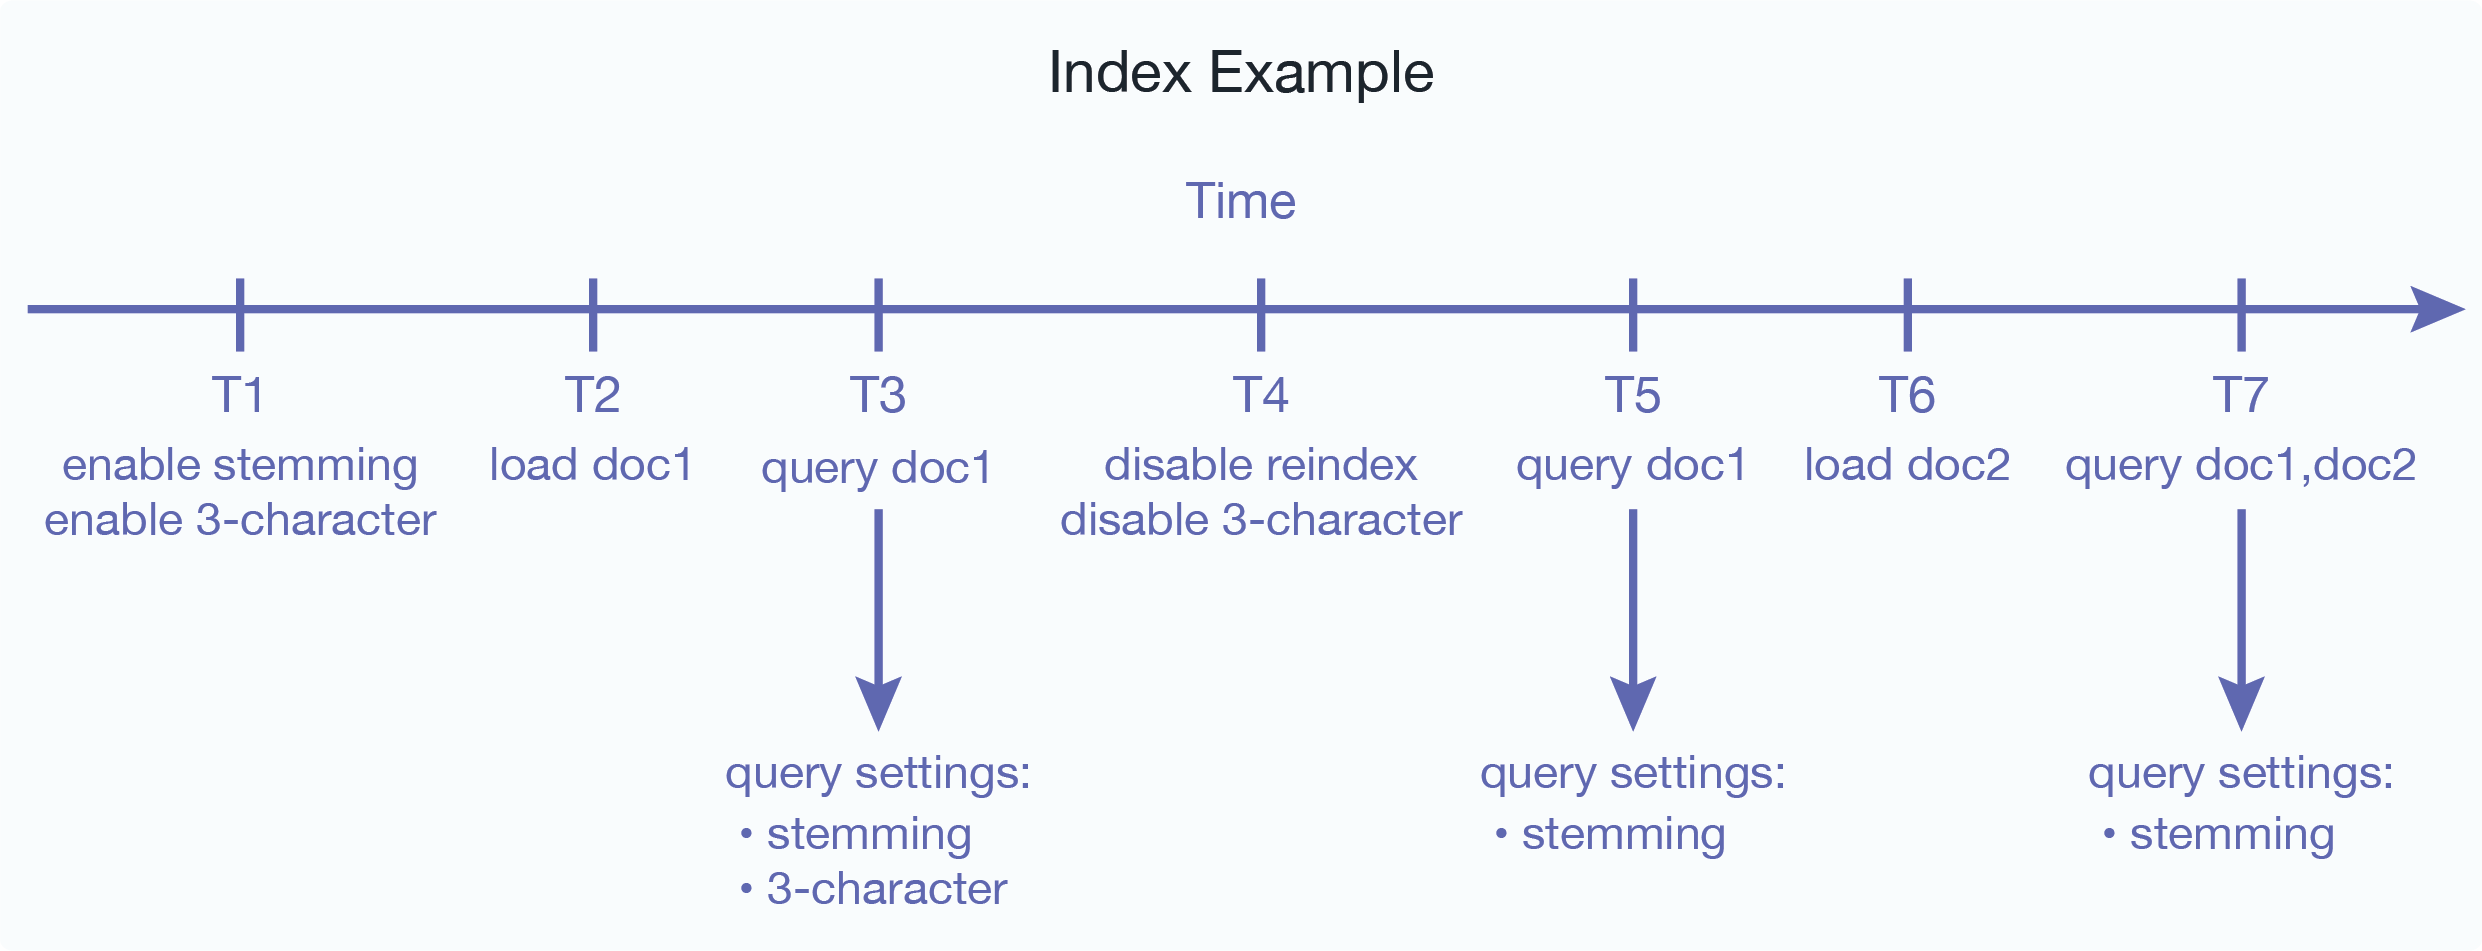 Figure showing how changing the index settings can affect queries that initiate after index setting changes occur.